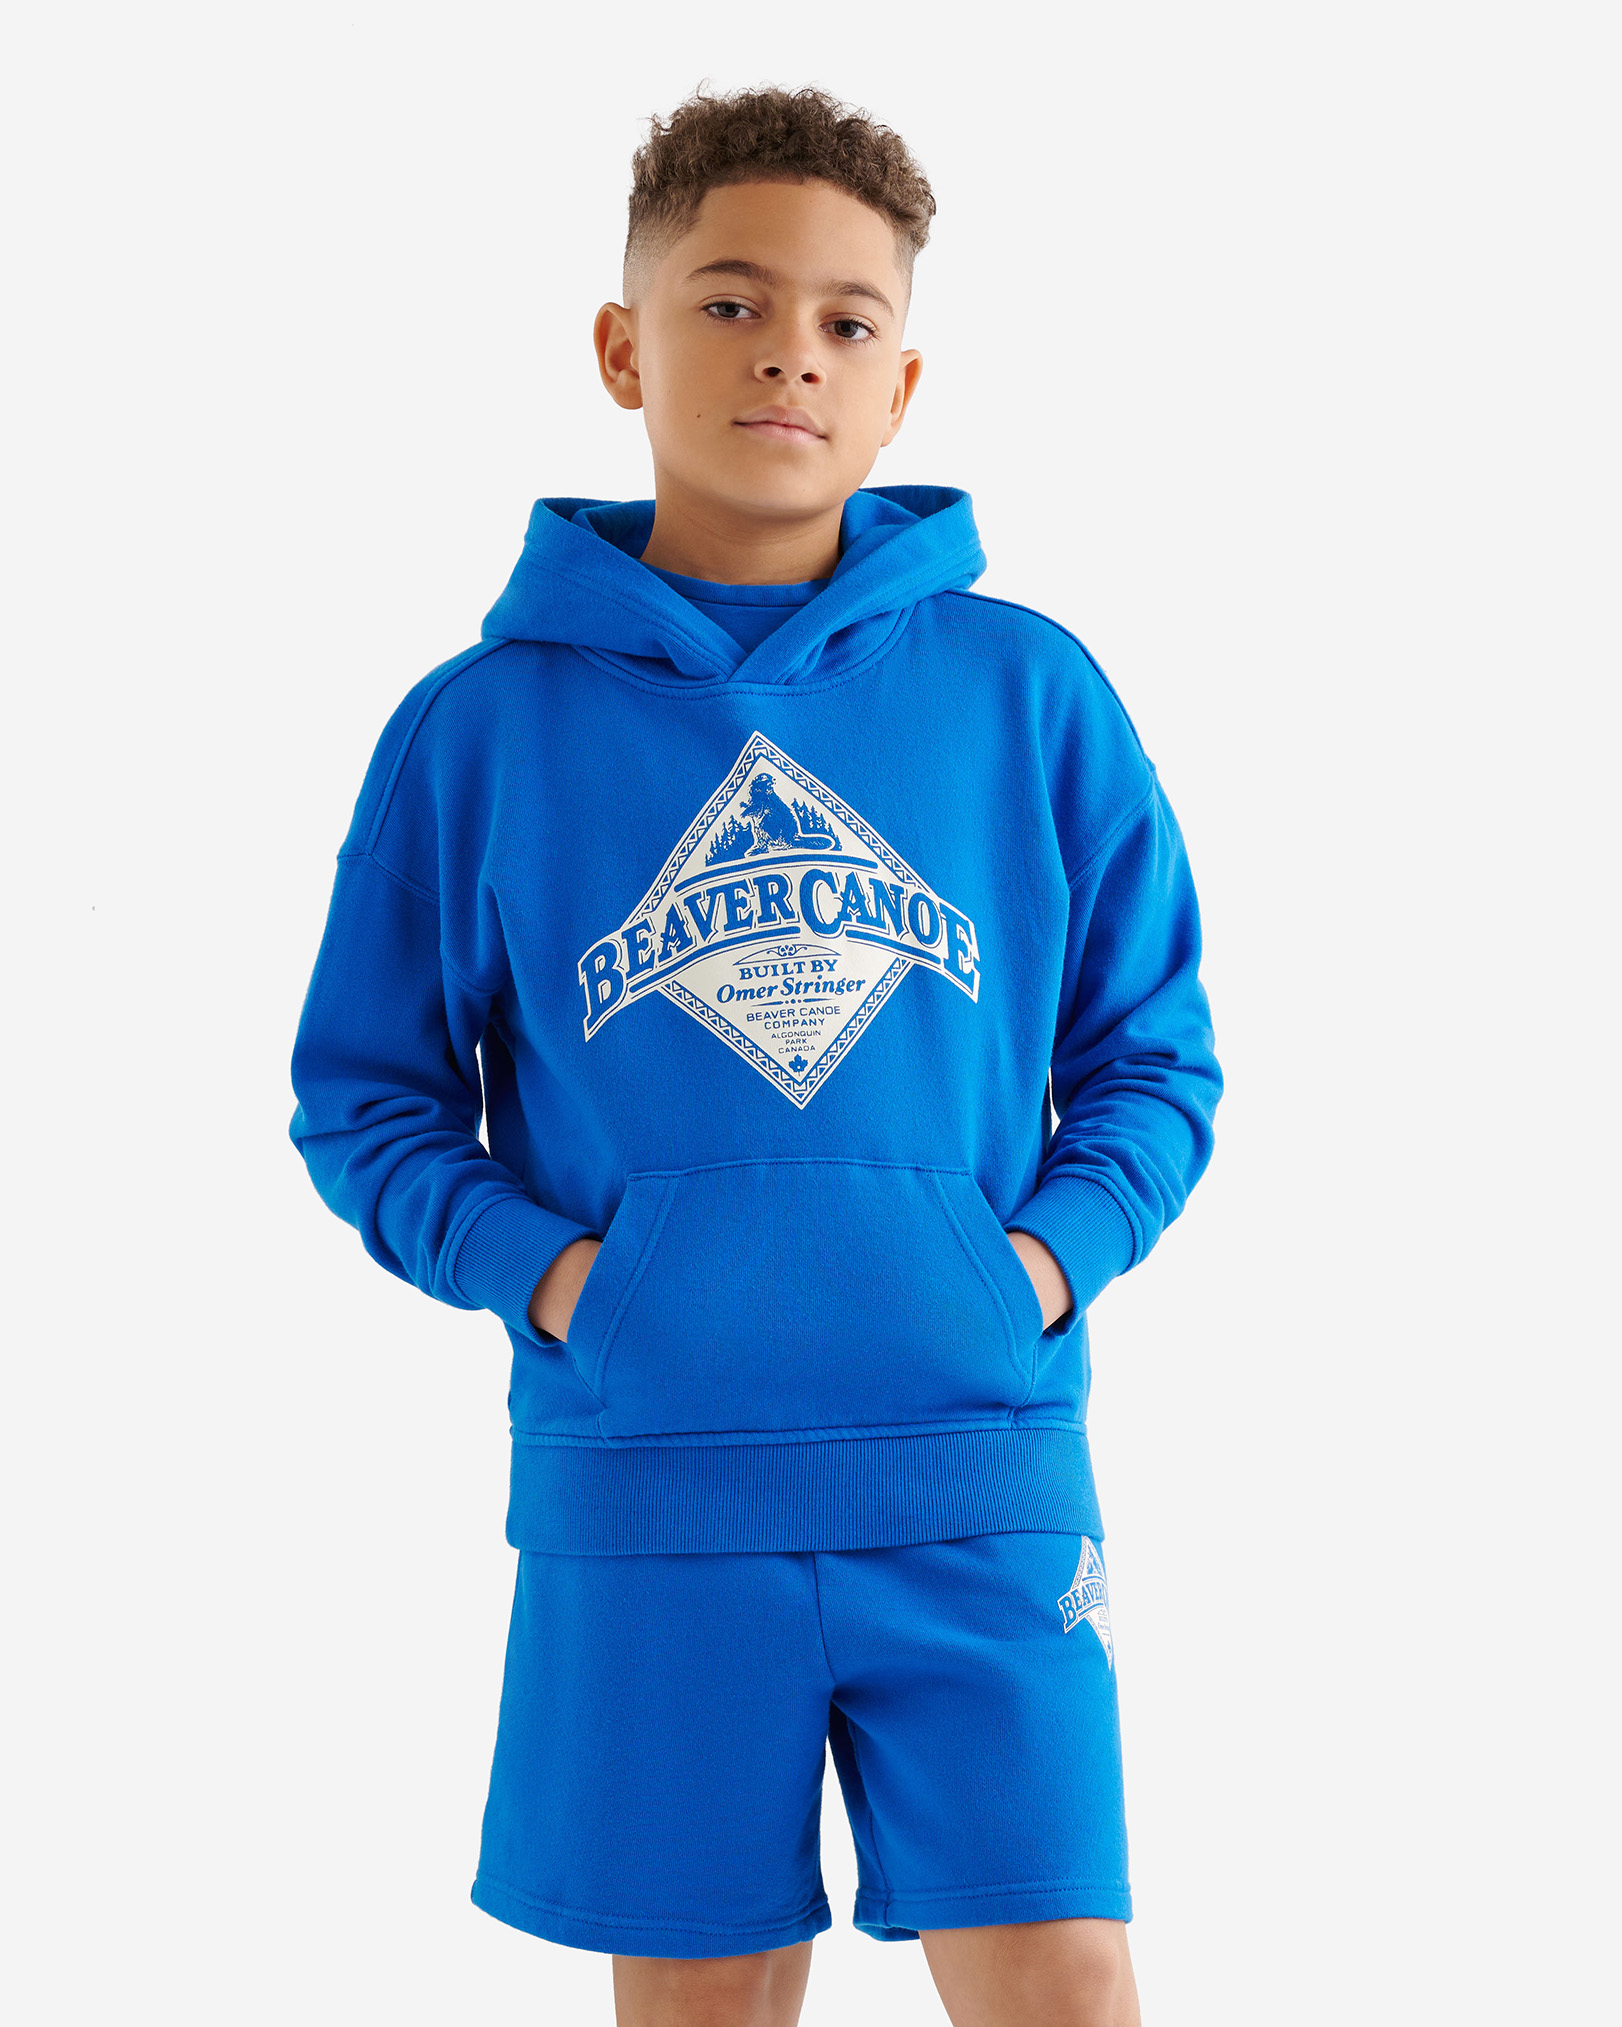 Roots Kids Beaver Canoe Relaxed Hoodie Jacket in Ace Blue